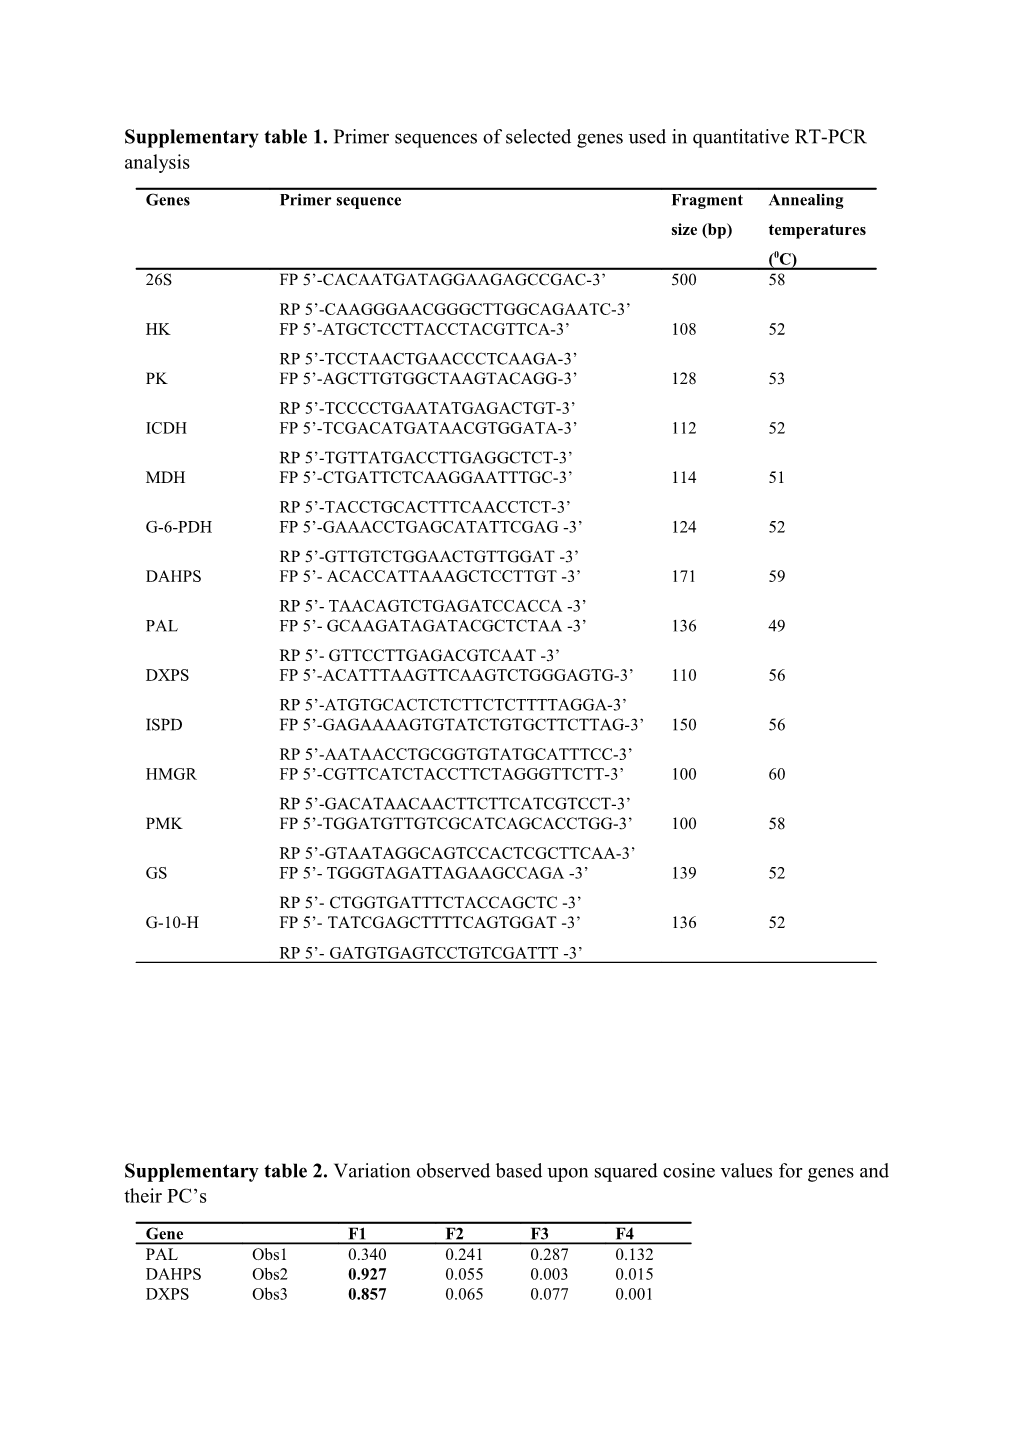 Supplementary Table 1. Primer Sequences of Selected Genes Used in Quantitative RT-PCR Analysis